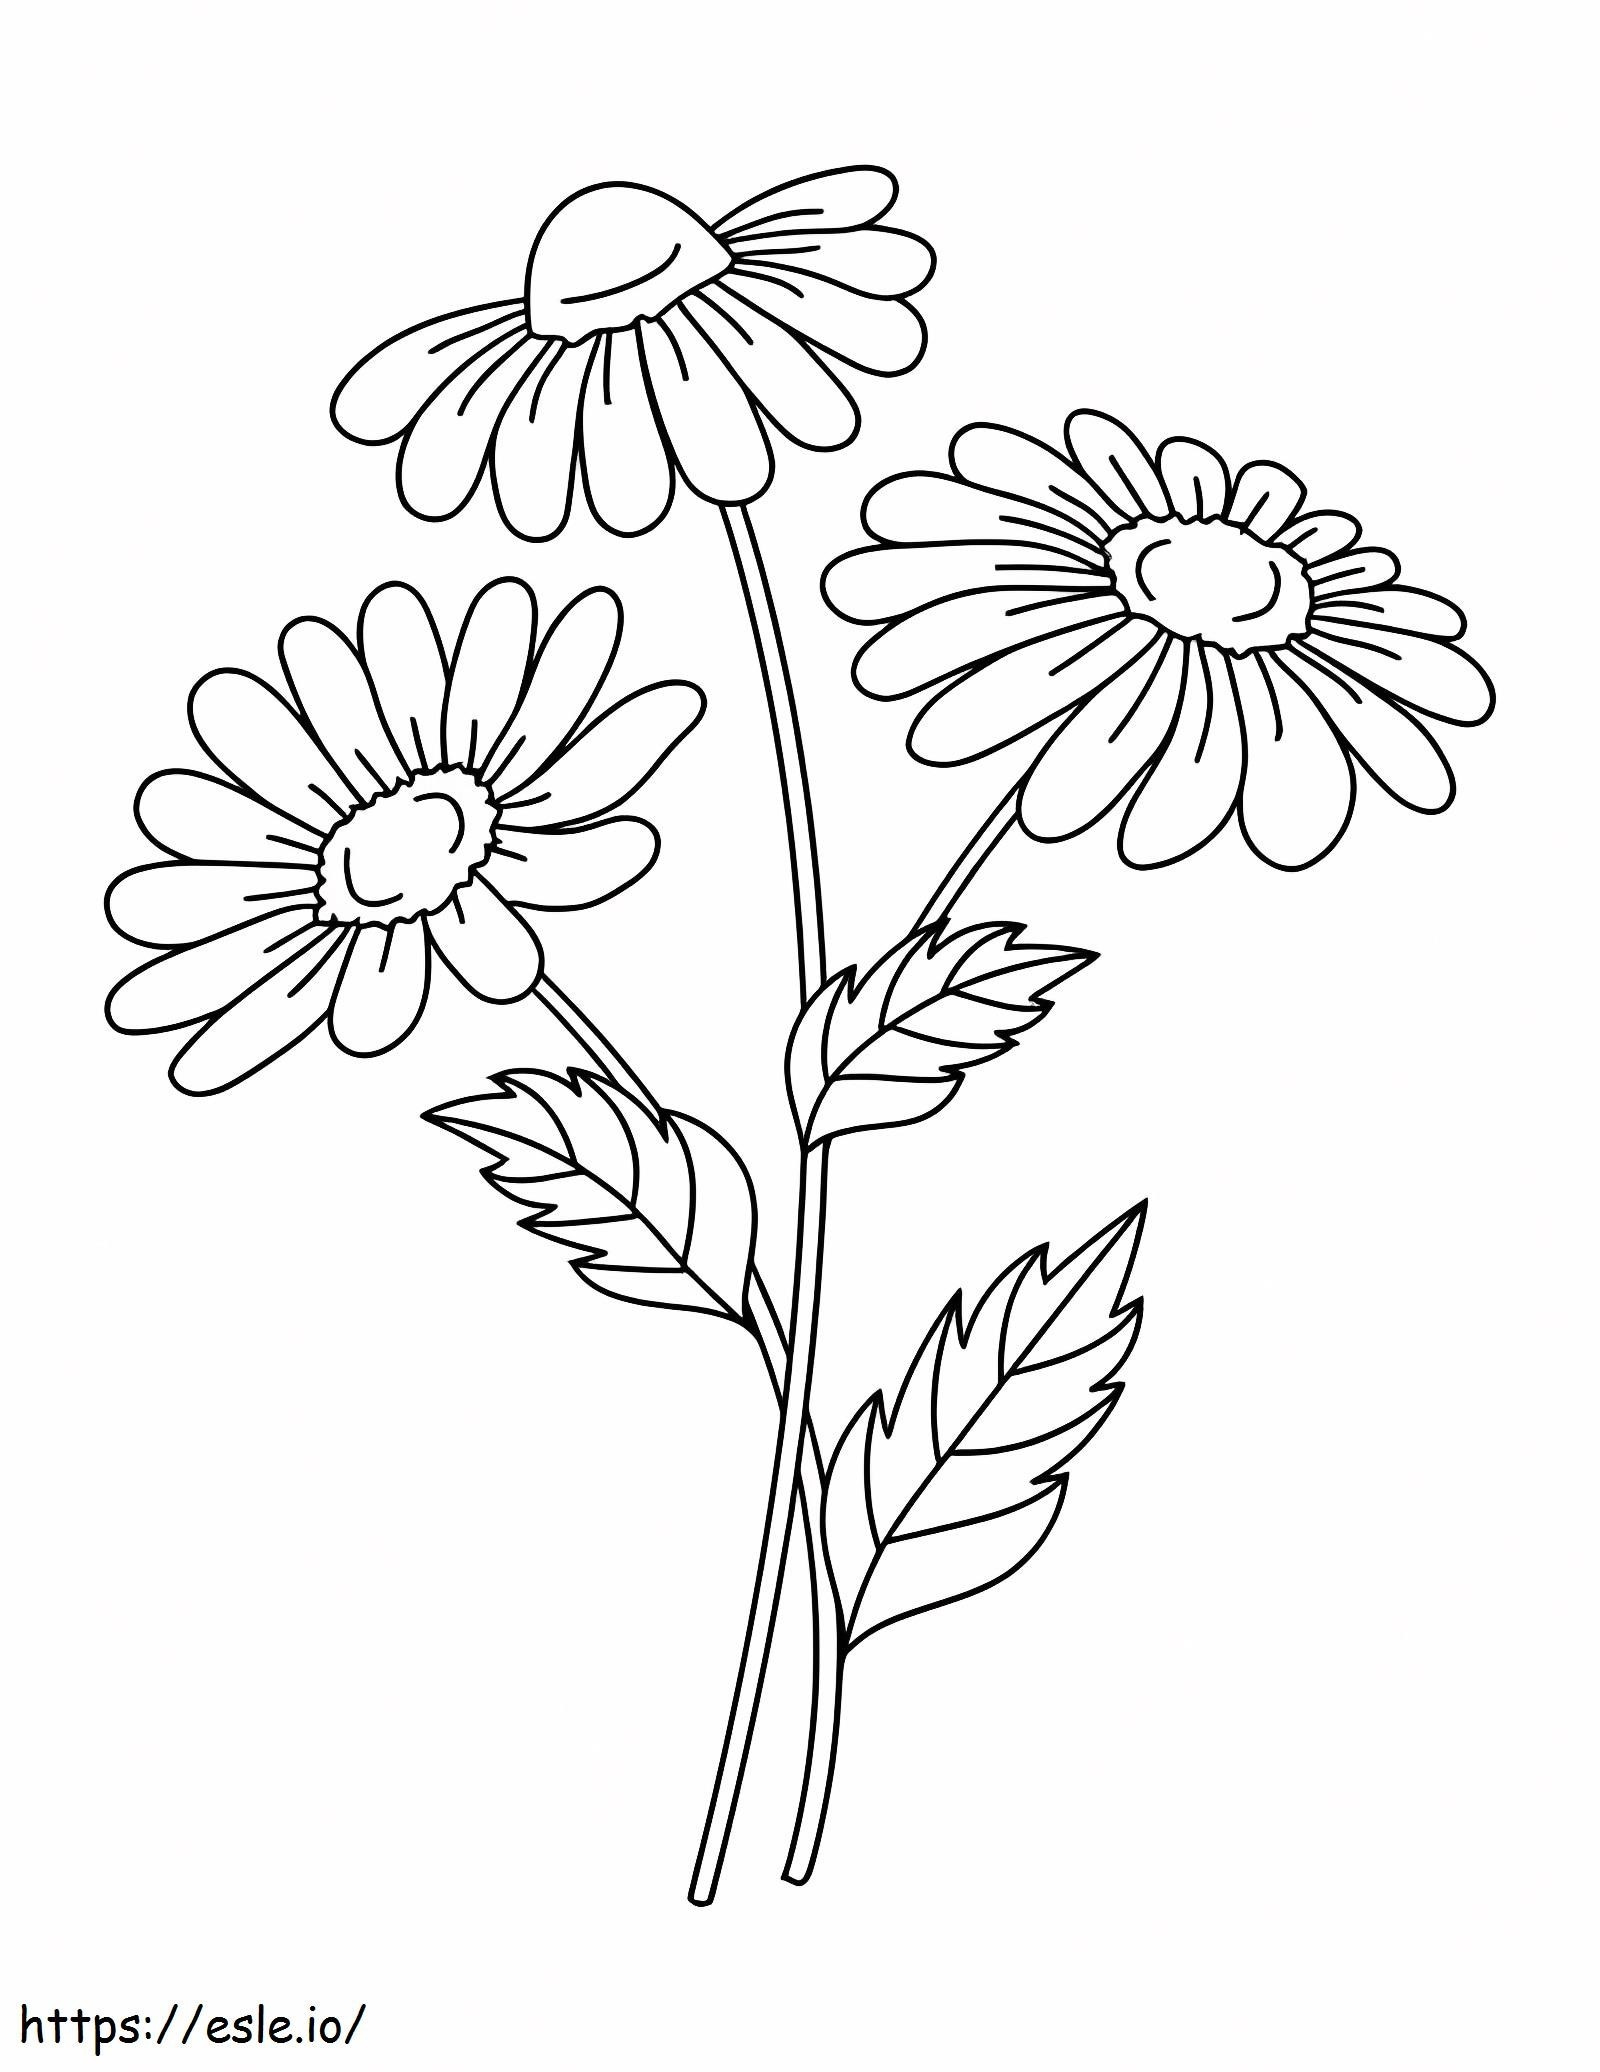 Three Flowers 1 coloring page